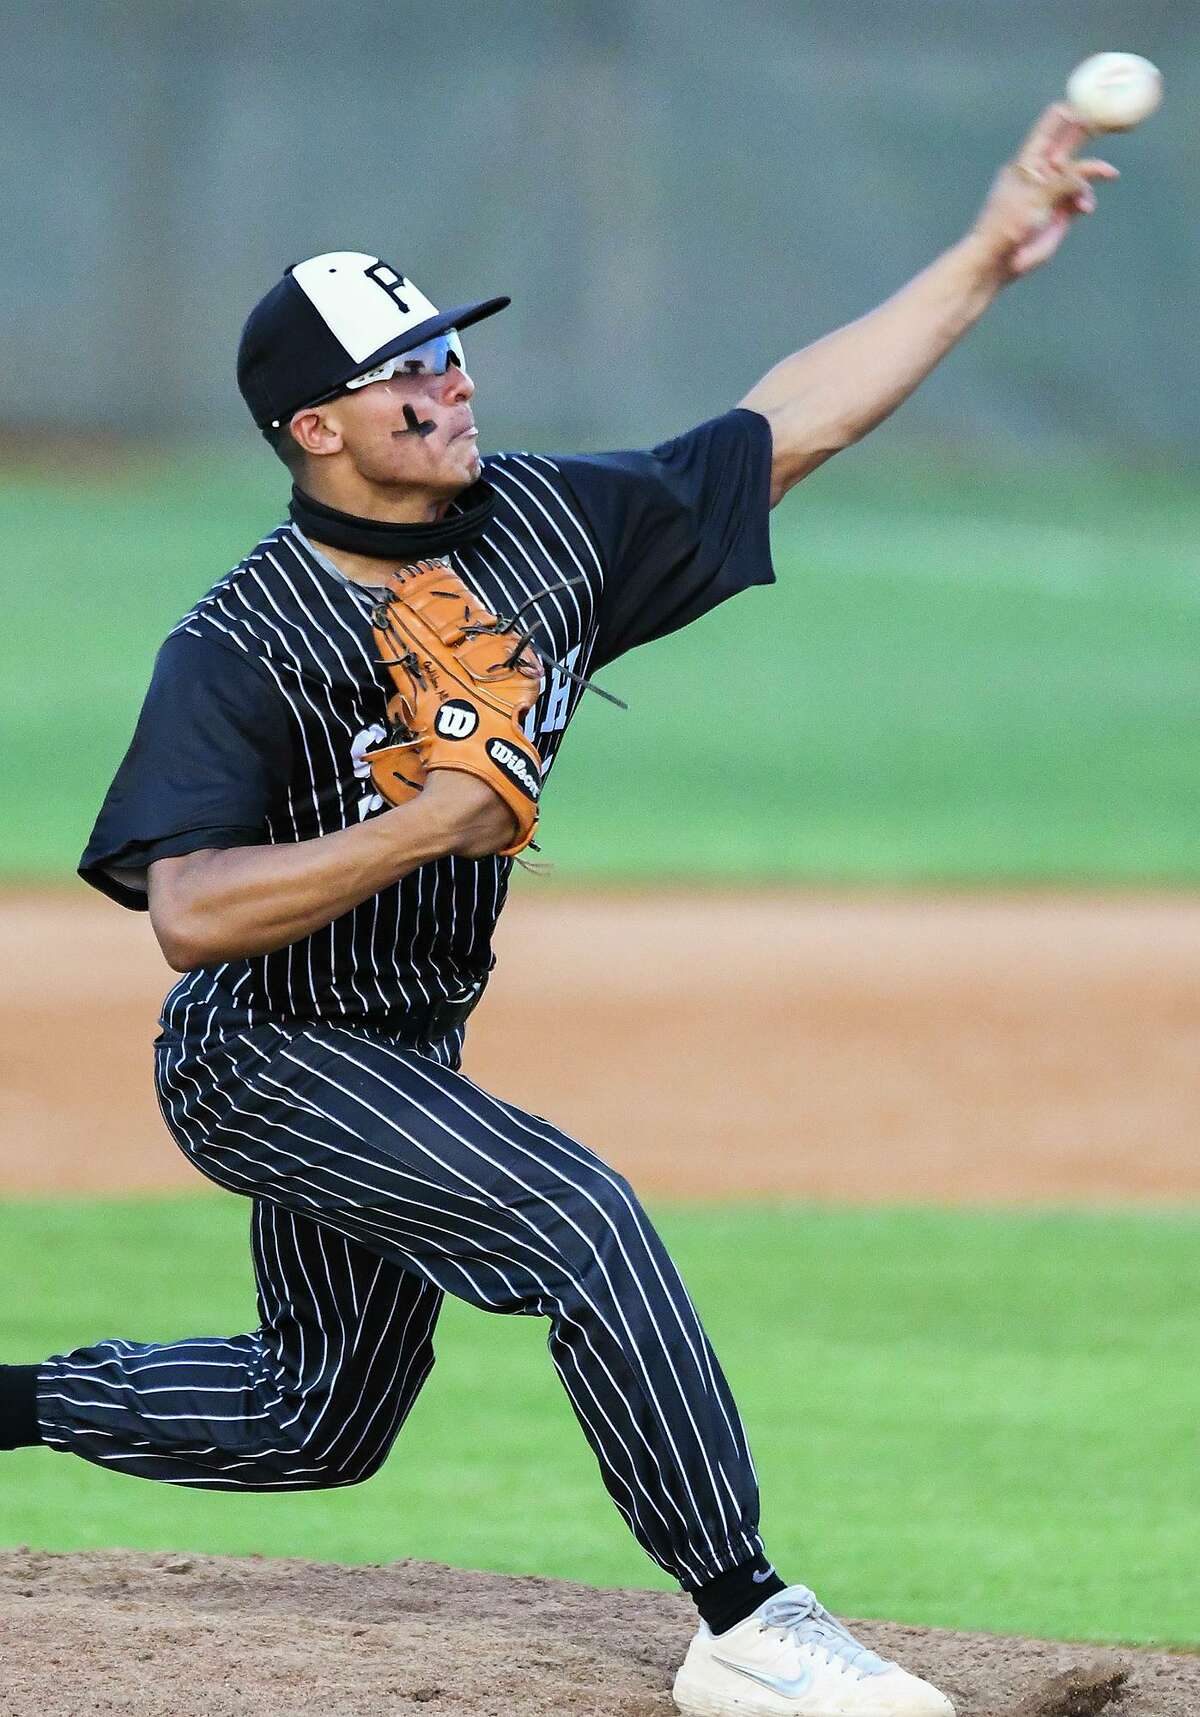 Juan Milera and the United South Panthers led United 10-3 heading into the bottom of the seventh inning as of press time Friday.